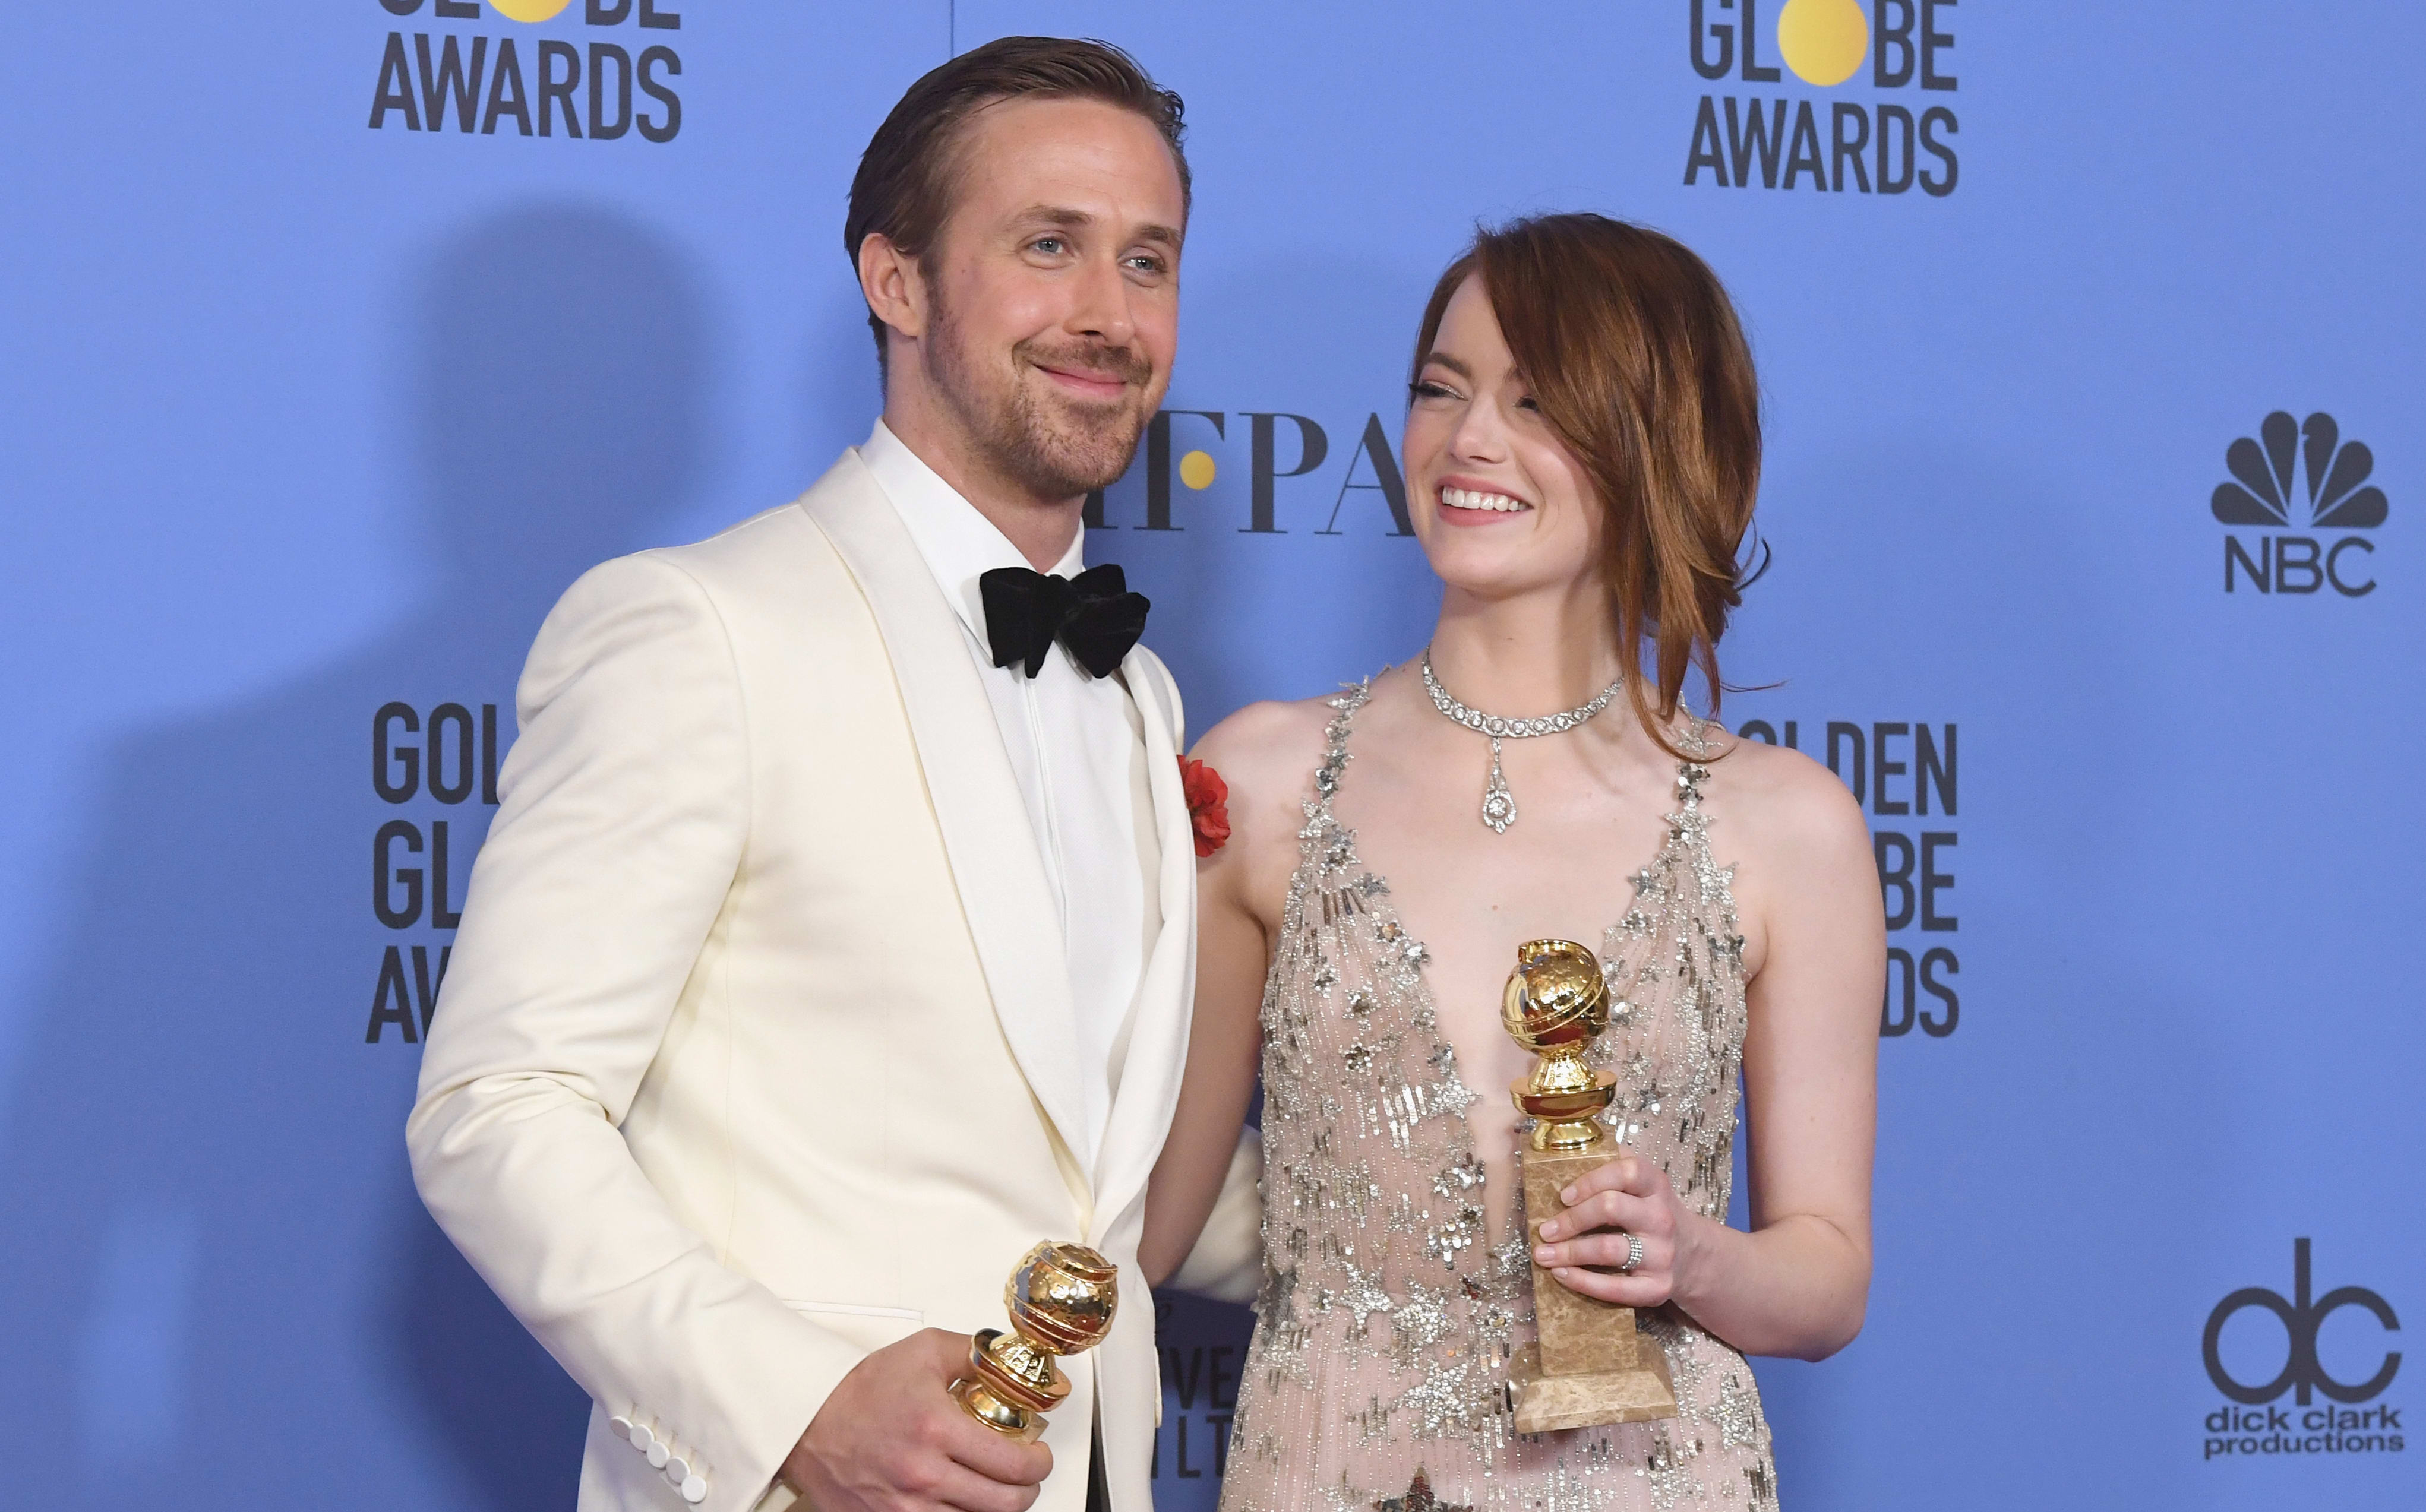 Actors Ryan Gosling and Emma Stone - winners for Best Actor and Best Actress in a Musical or Comedy Film for La La Land.